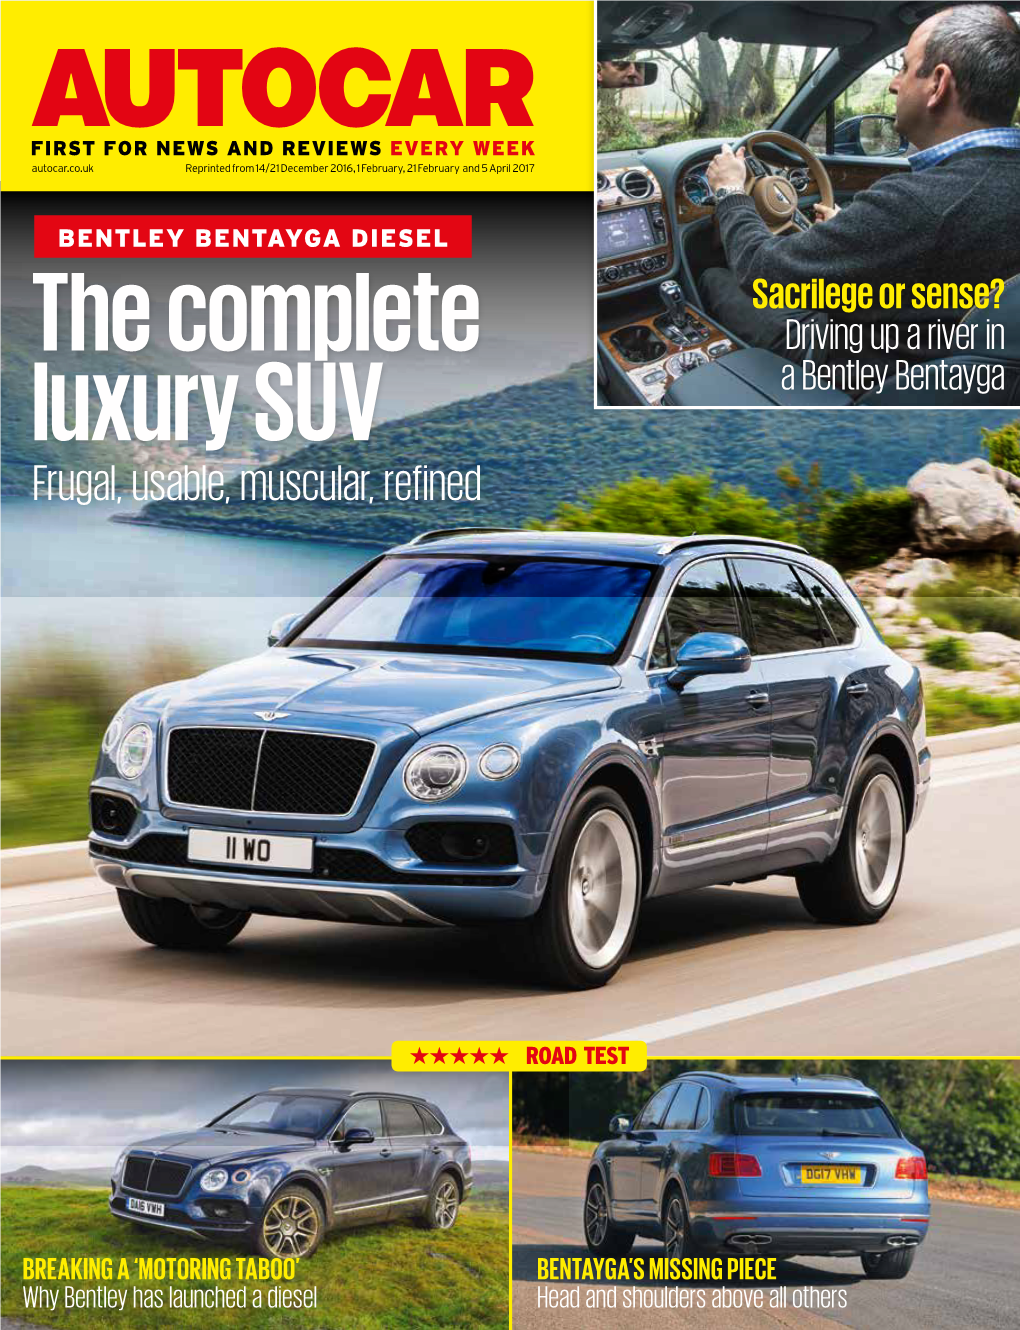 BENTLEY BENTAYGA DIESEL Sacrilege Or Sense? the Complete Driving up a River in Luxury SUV a Bentley Bentayga Frugal, Usable, Muscular, Refined